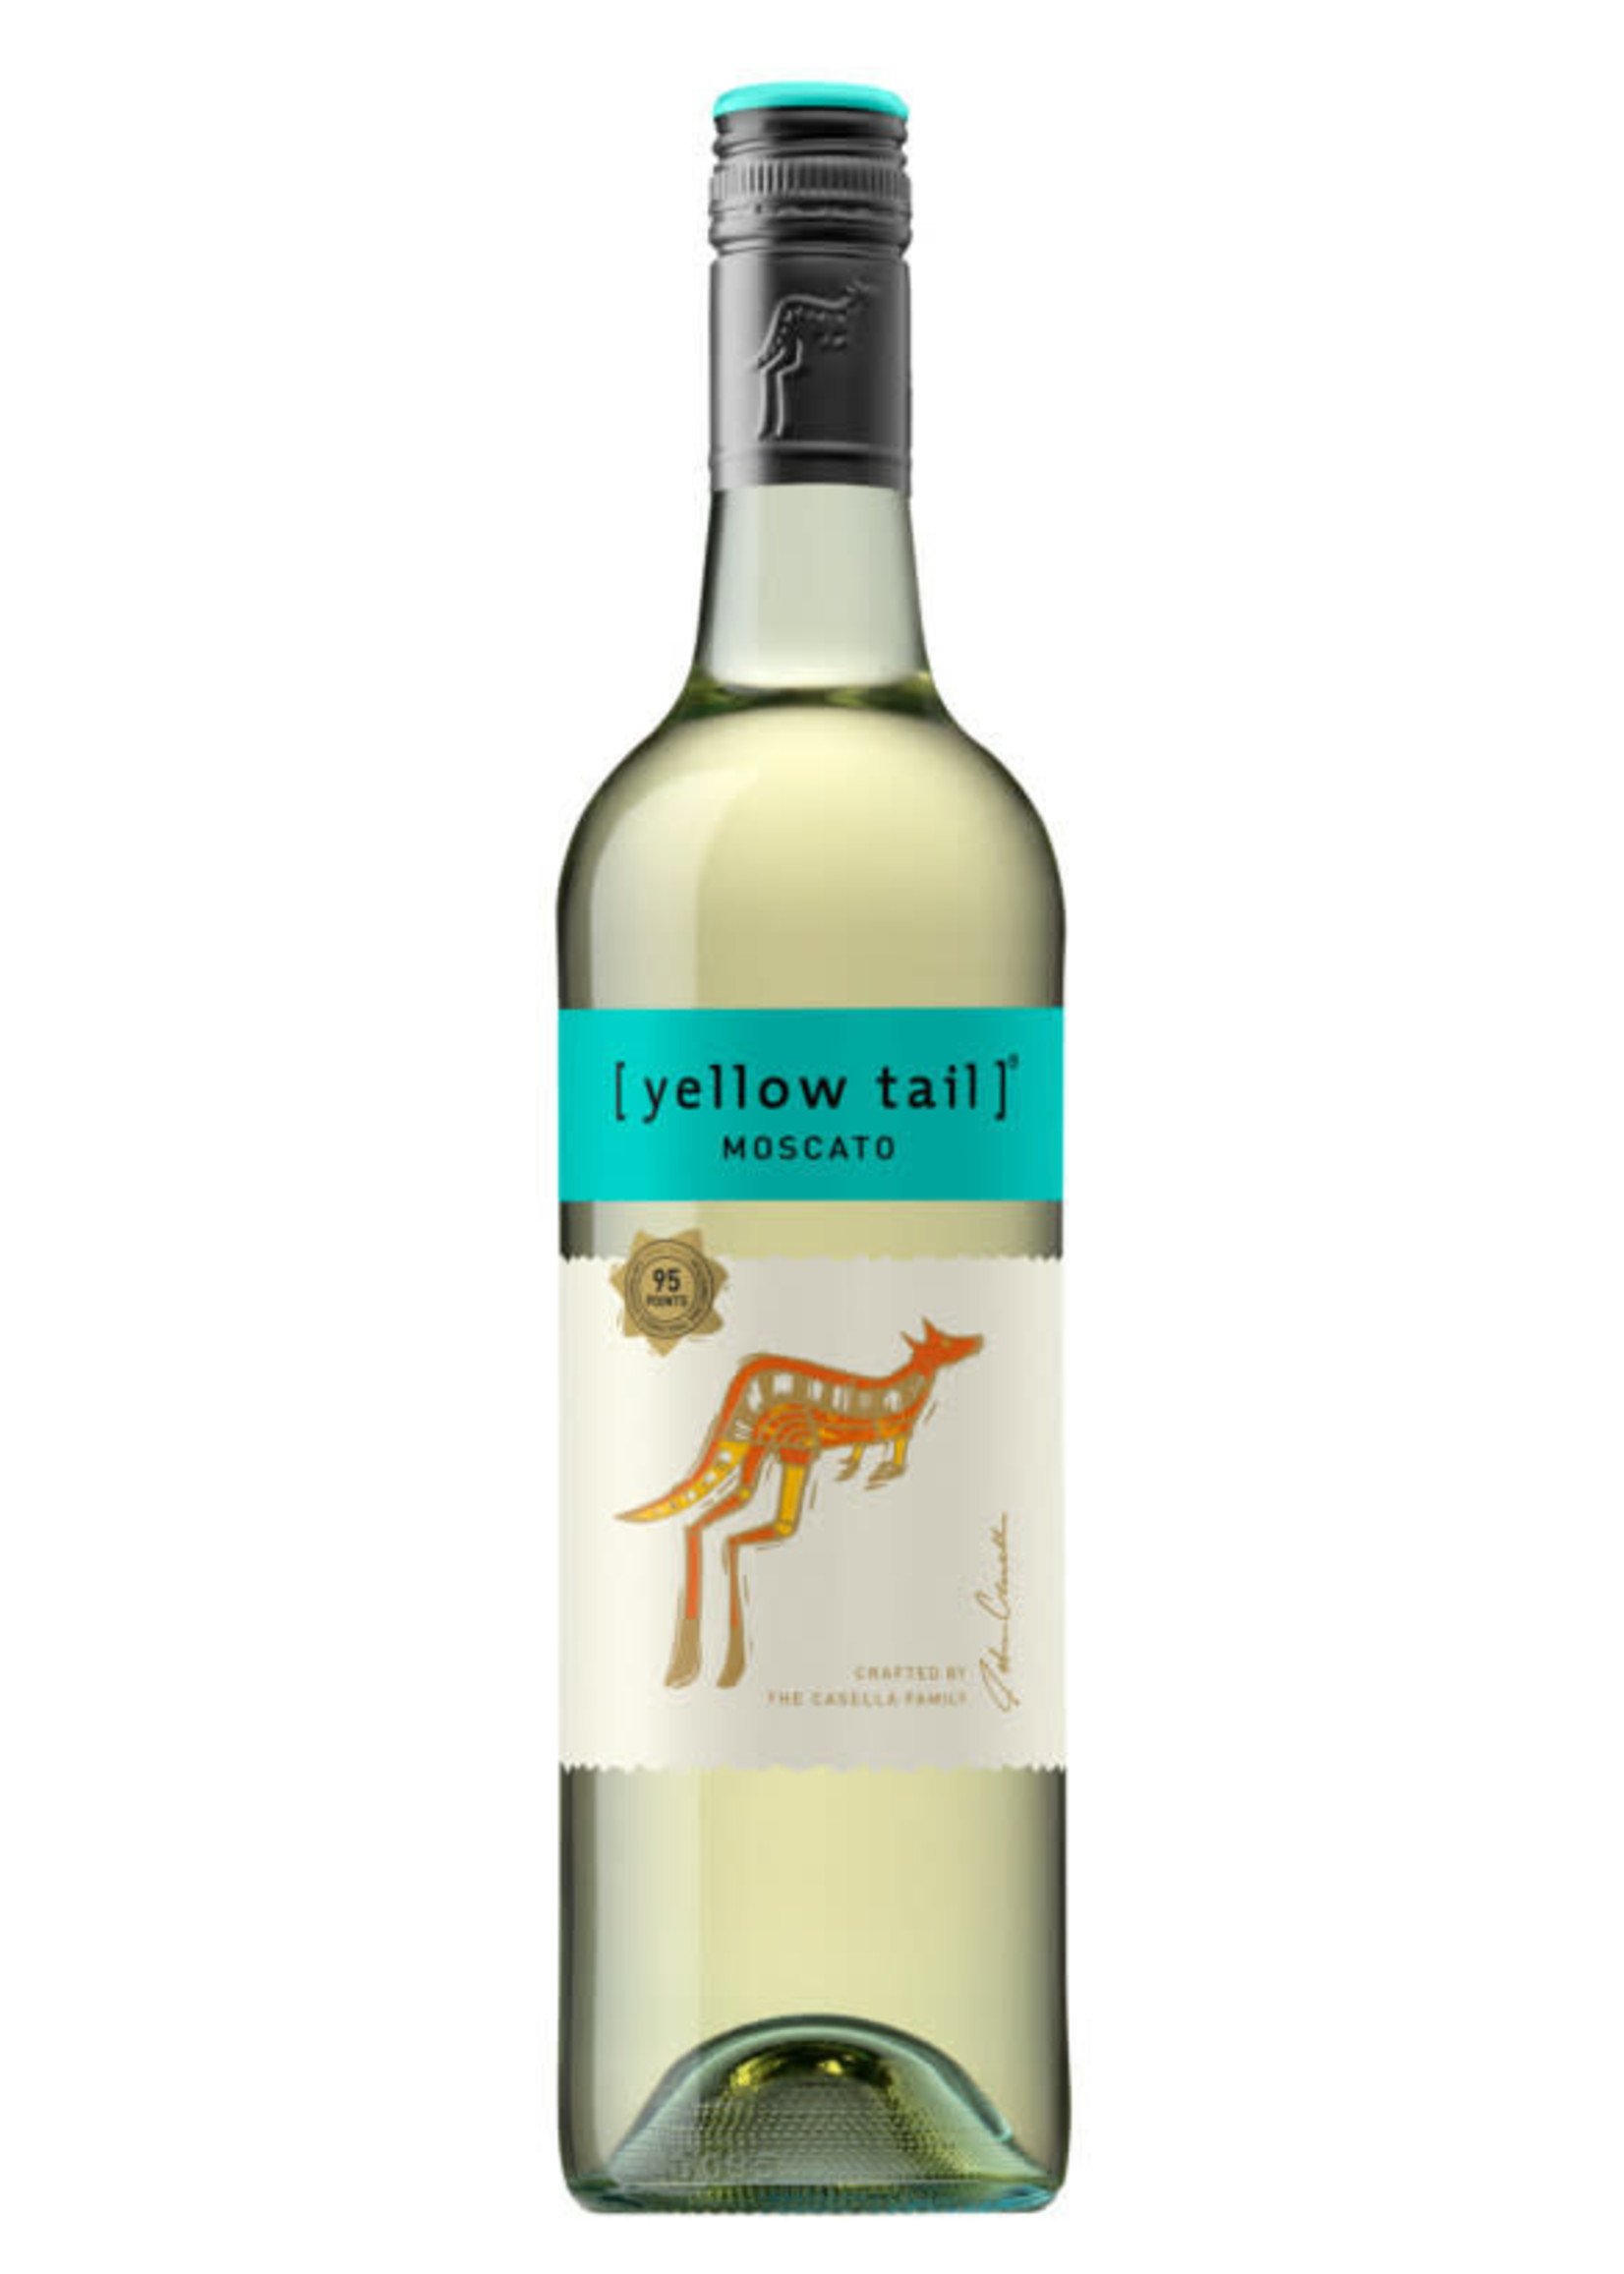 YELLOW TAIL YELLOW TAIL	MOSCATO	.750L